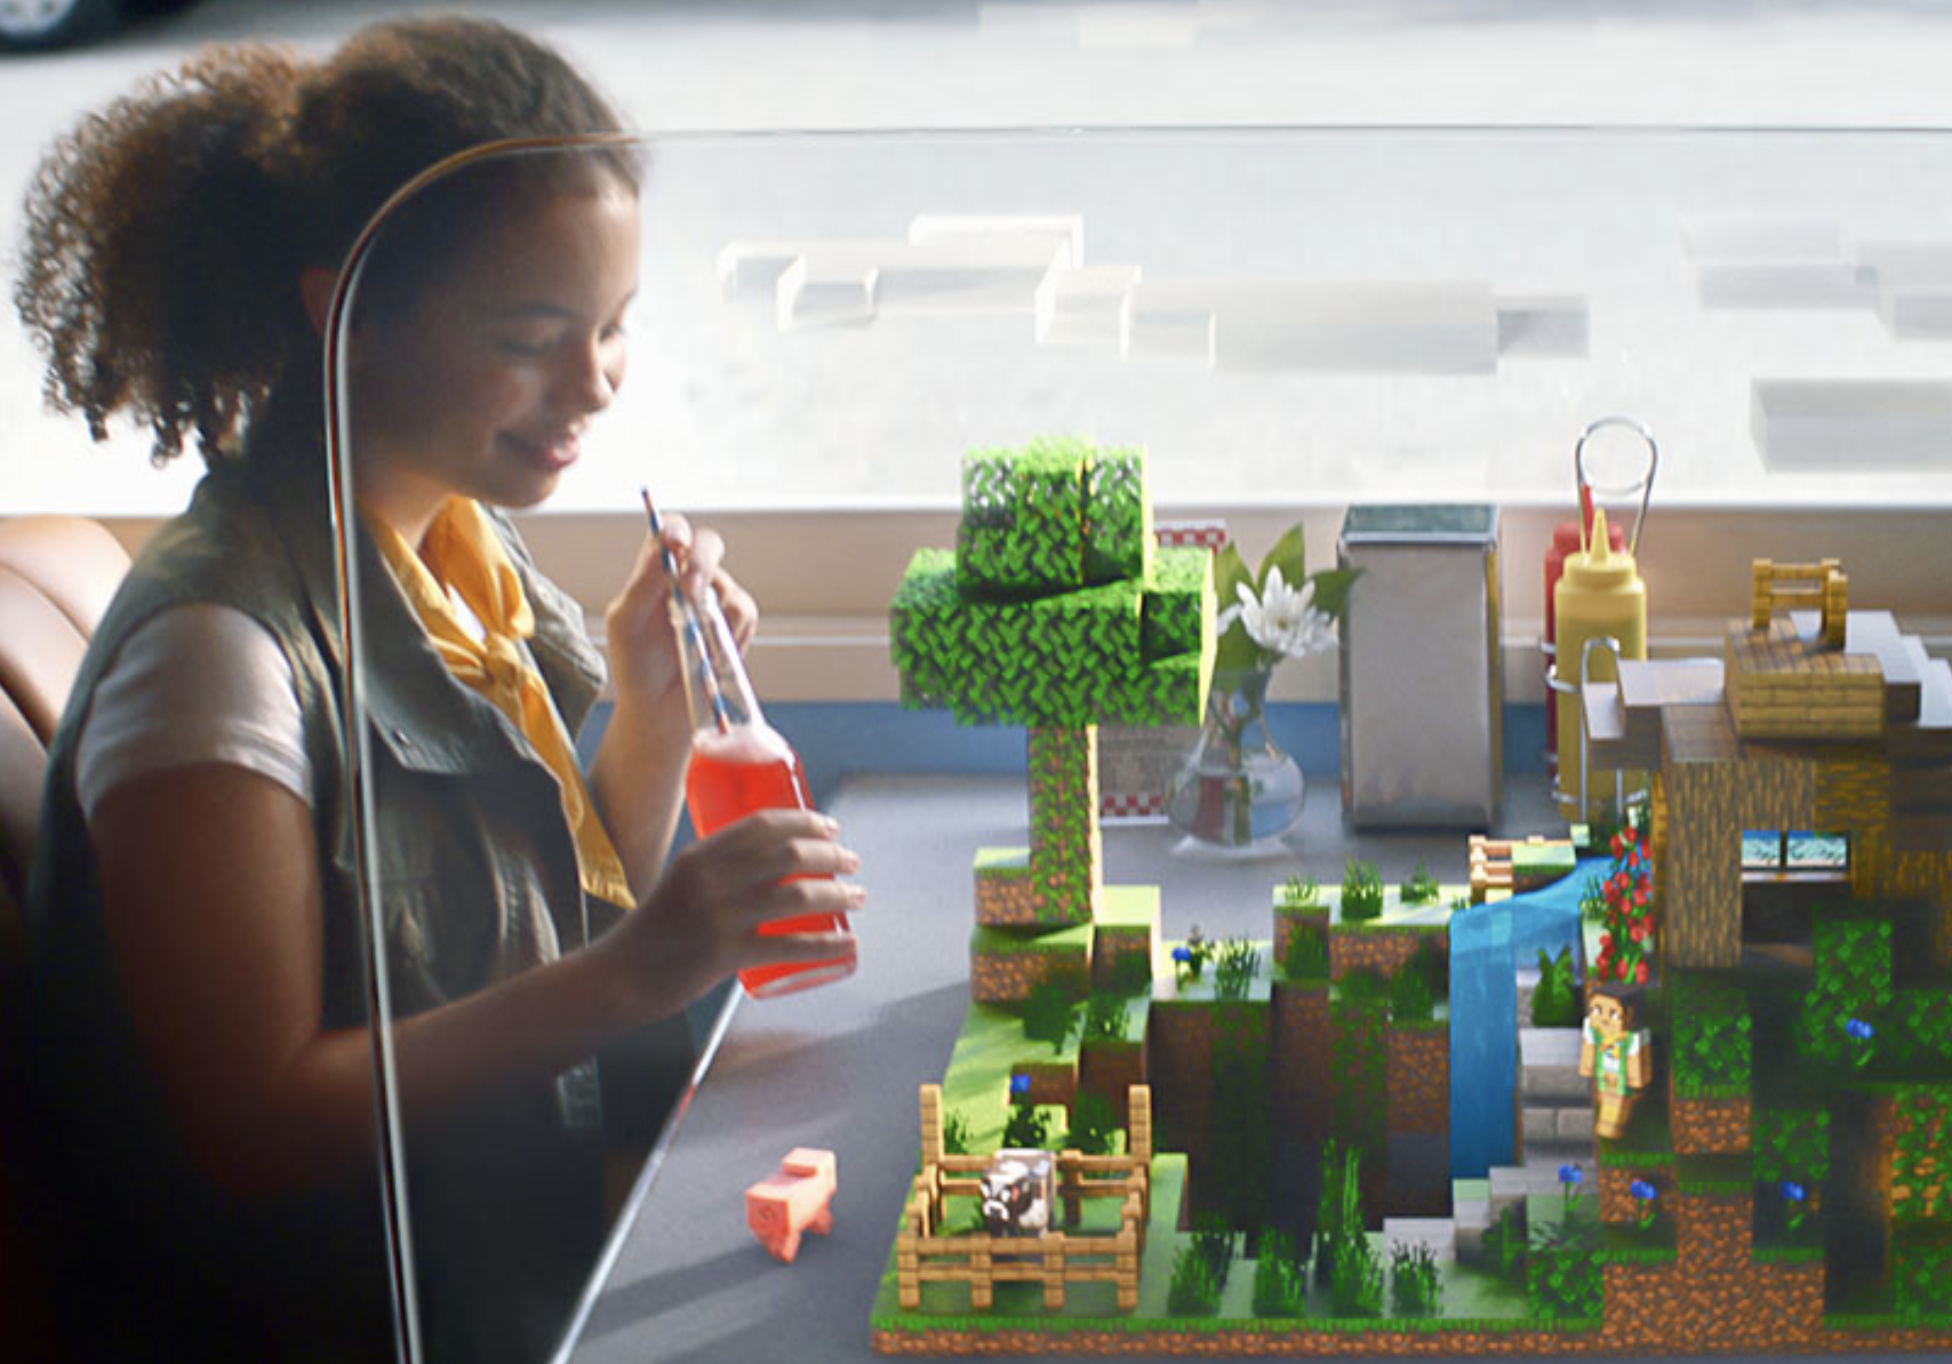 New Minecraft Earth Game In Augmented Reality